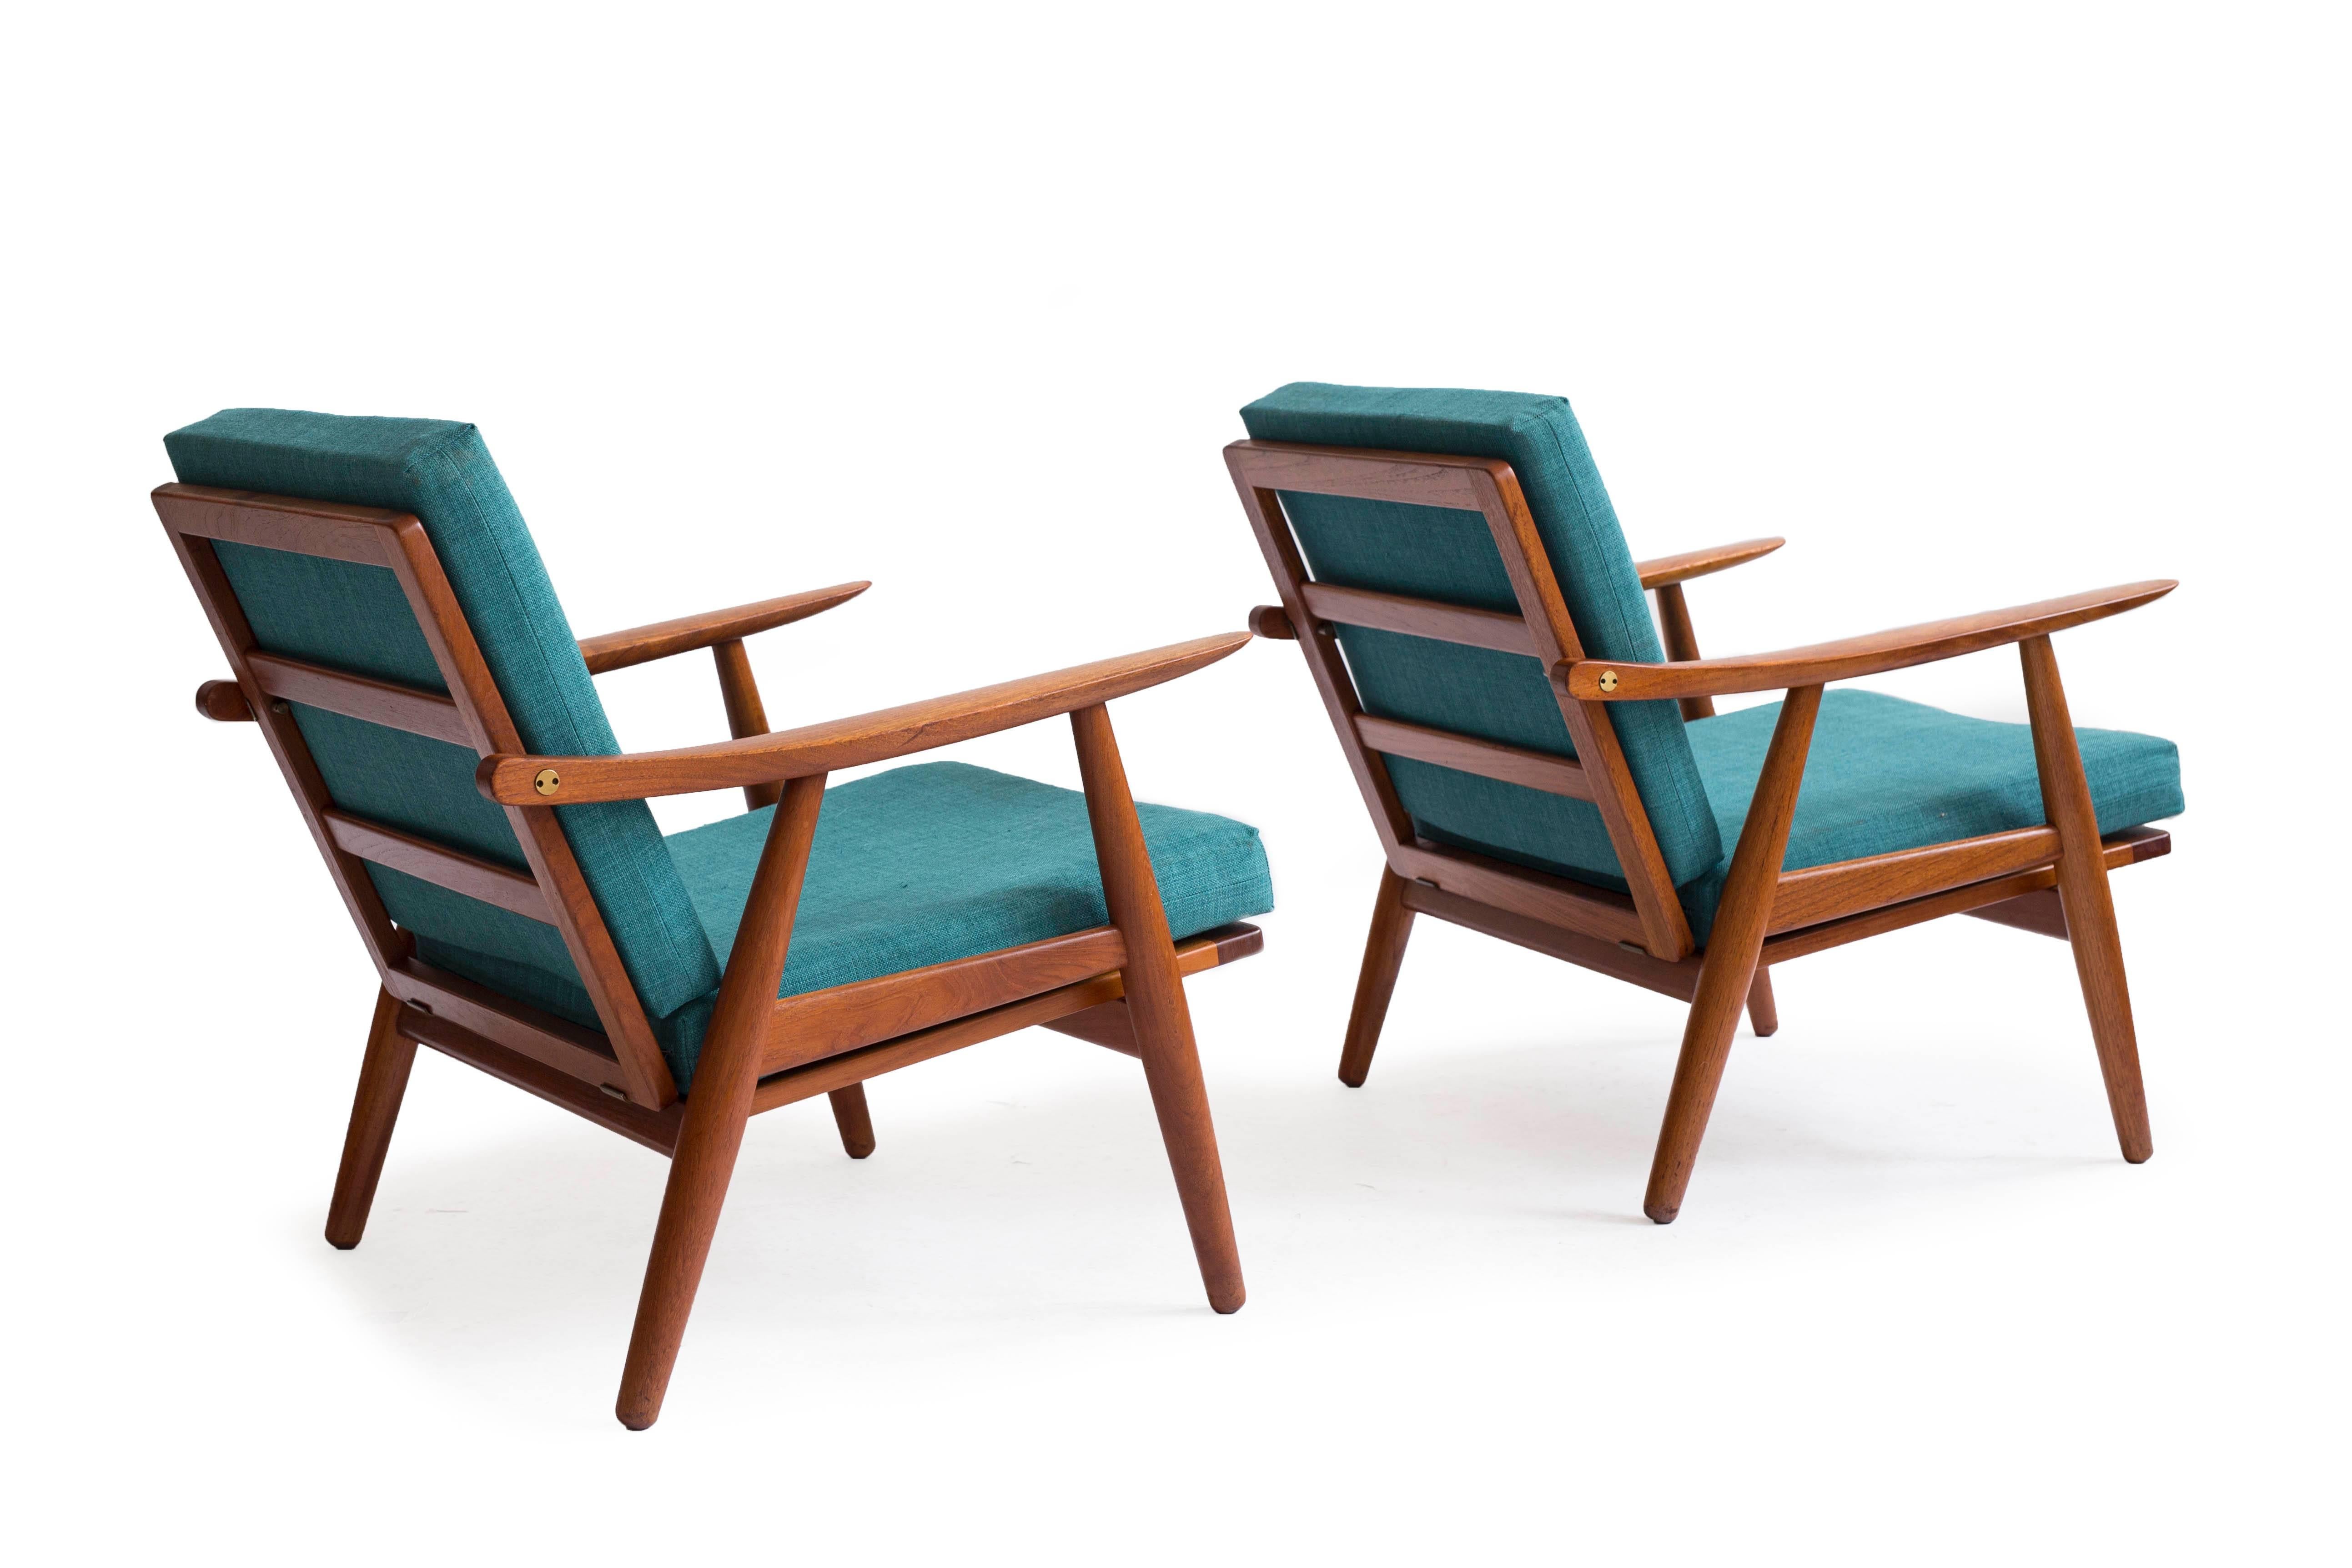 A pair of Hans J. Wegner teak GE270 easy chairs with original loose fabric cushions and brass details. 

Designed by Hans J. Wegner 1950, manufactured by GETAMA, Denmark.
Both chairs burn marked by maker.
Fine original condition.